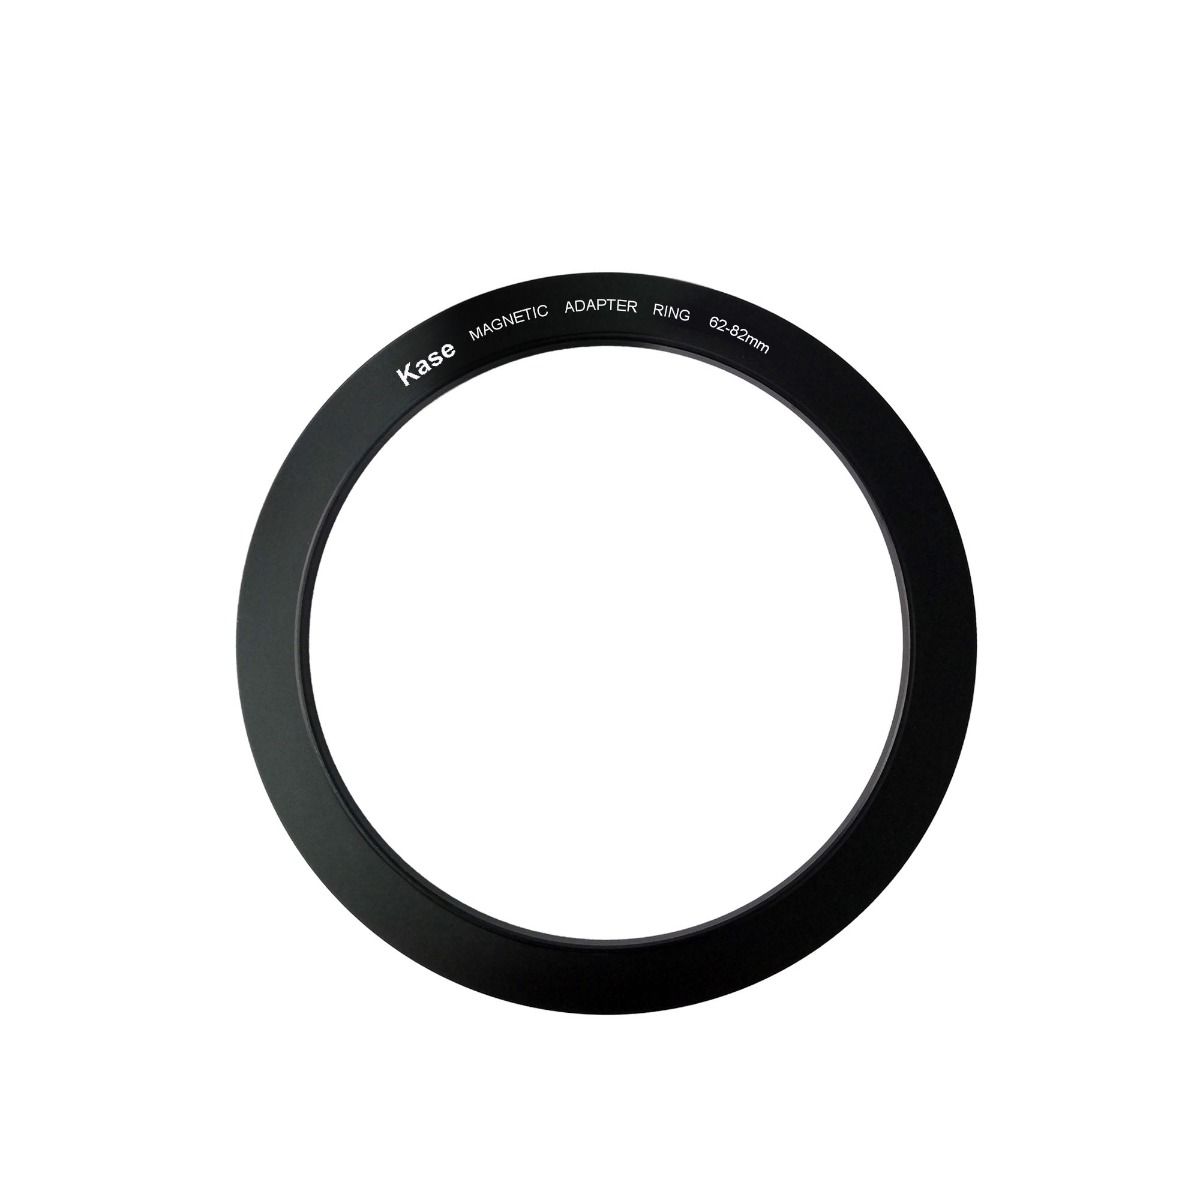 Product Image of Kase 67-82mm magnetic circular step up ring